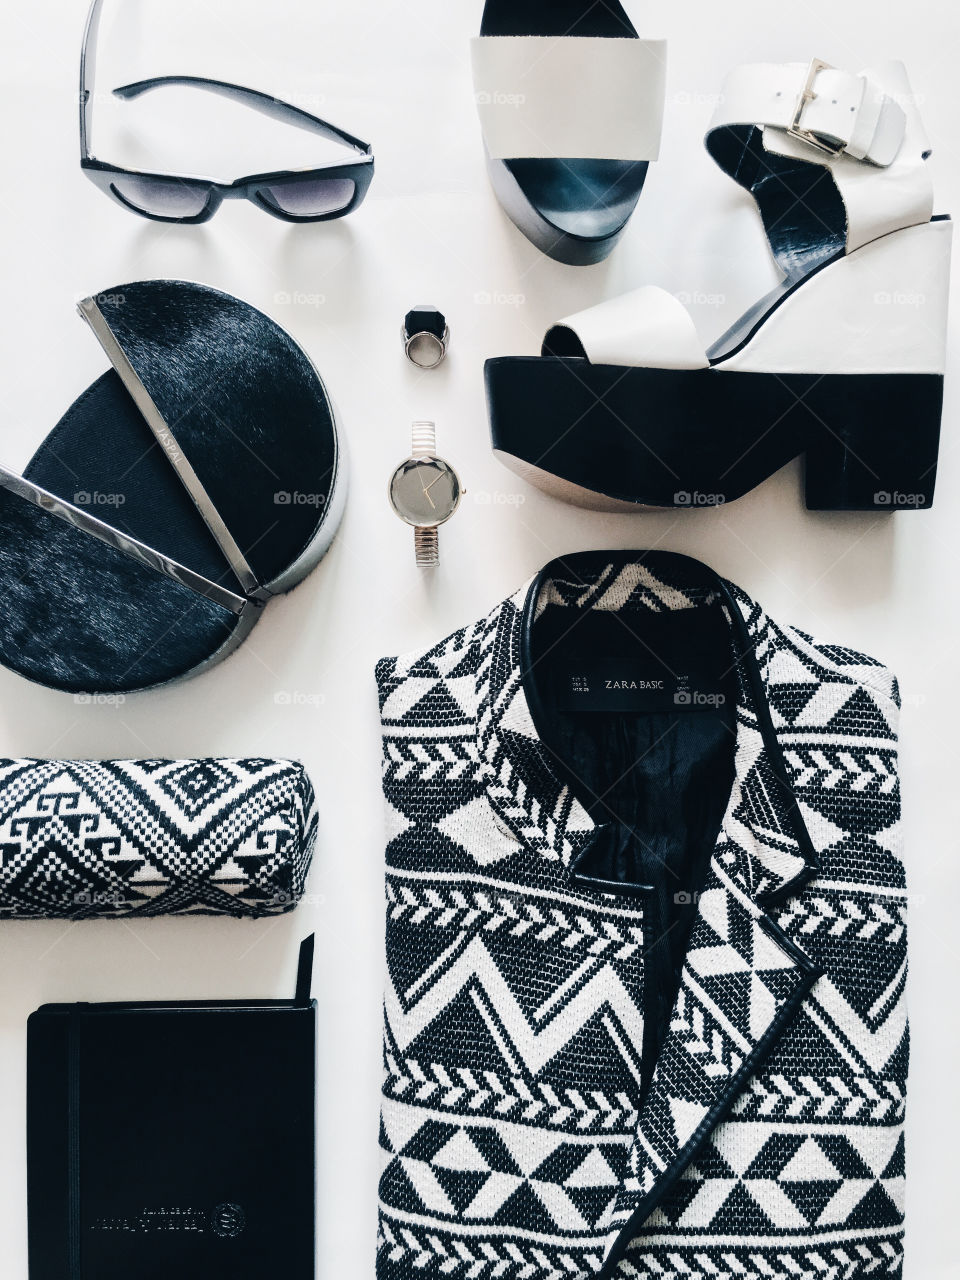 Awesome fashion flat lays with modern ethnic black and white items.